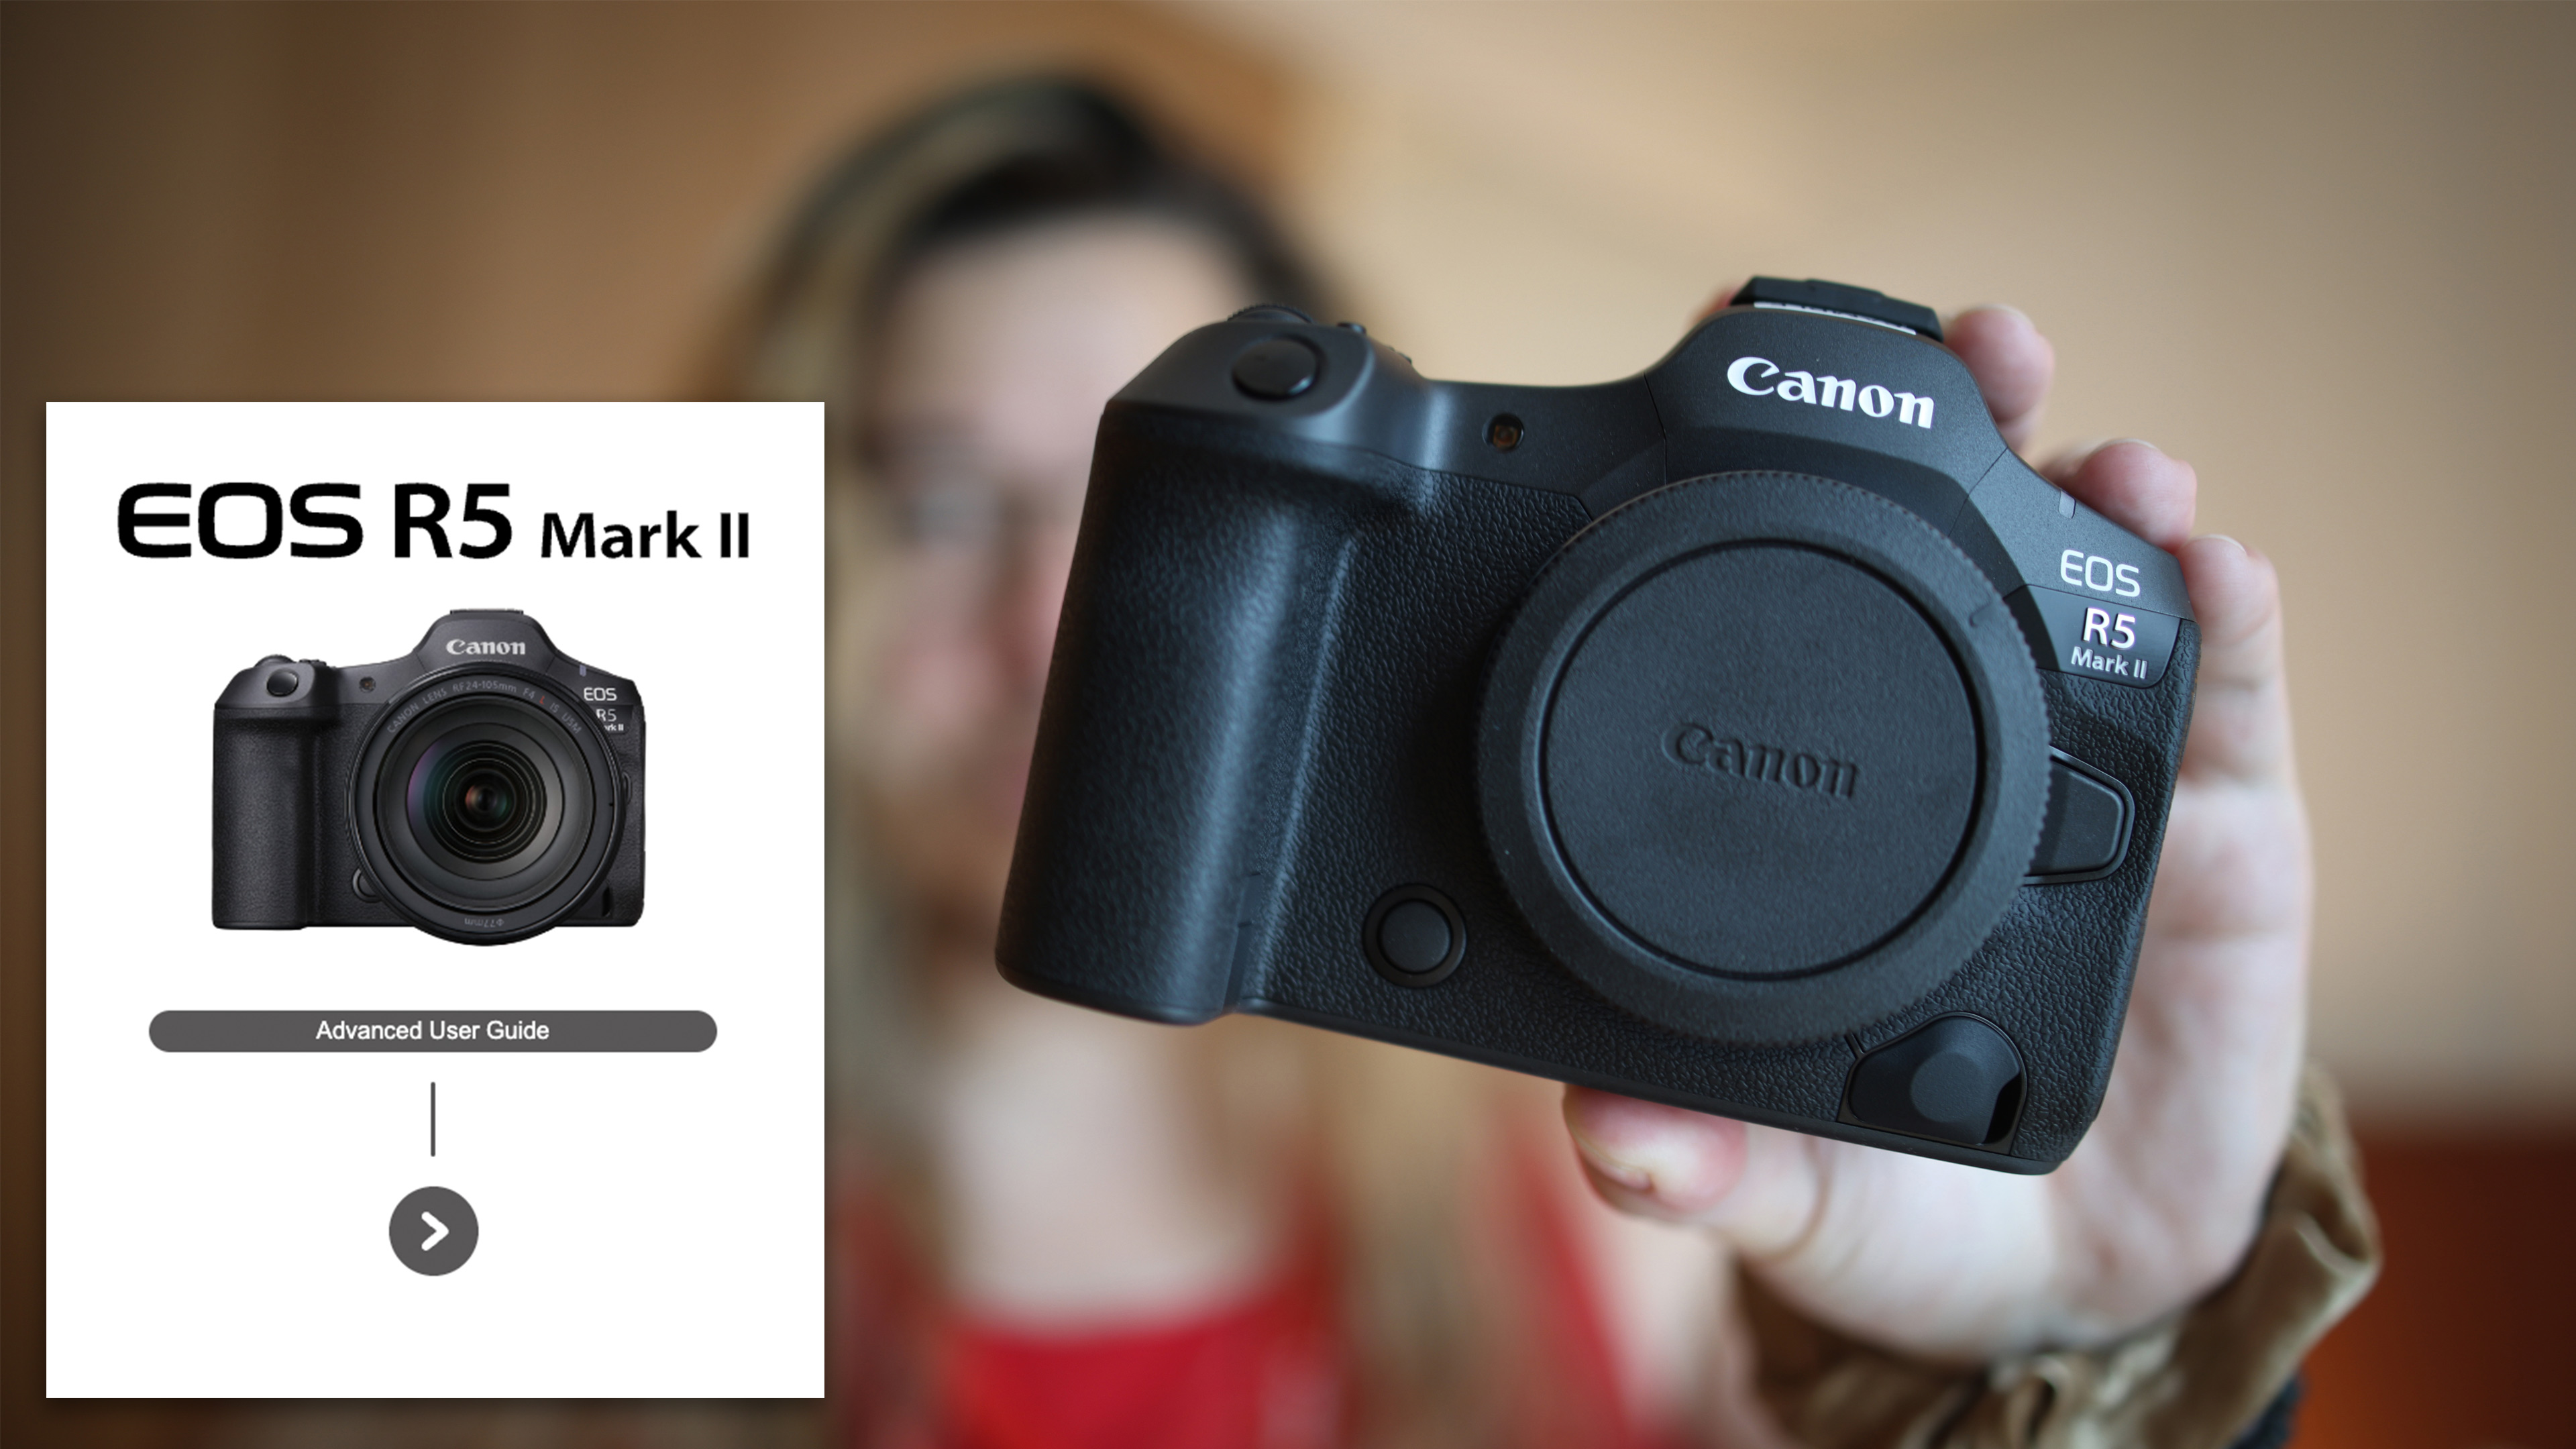 Want to know EVERYTHING about the Canon EOS R5 Mark II before you invest in "the most pre-ordered camera"? You can!